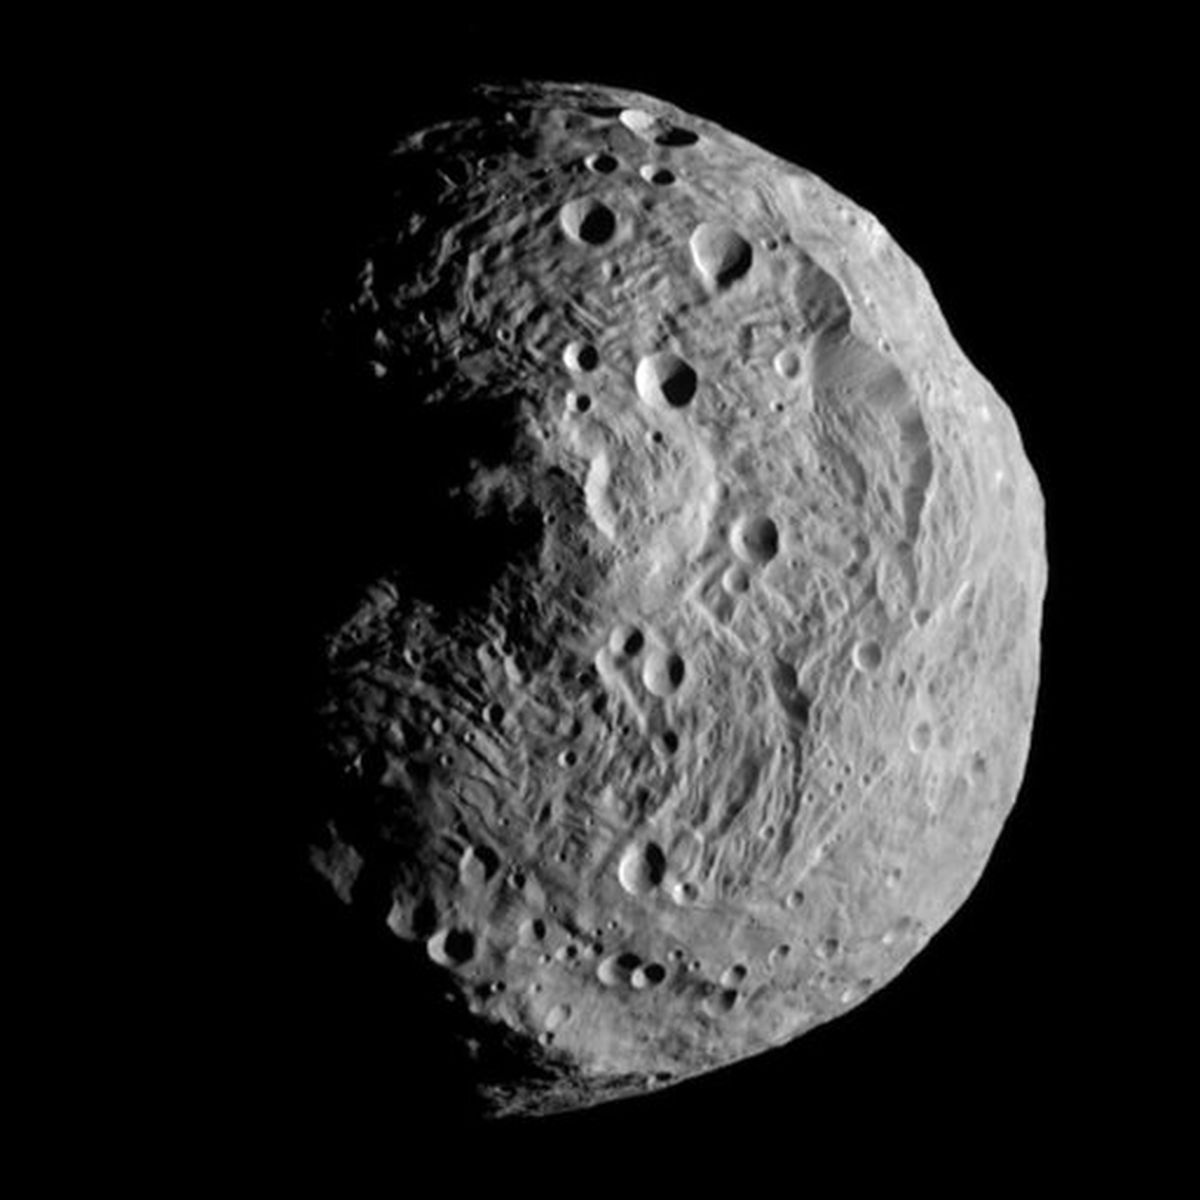 This image of the asteroid Vesta was taken by the Dawn spacecraft on Sunday from a distance of about 9,500 miles away. (Associated Press)